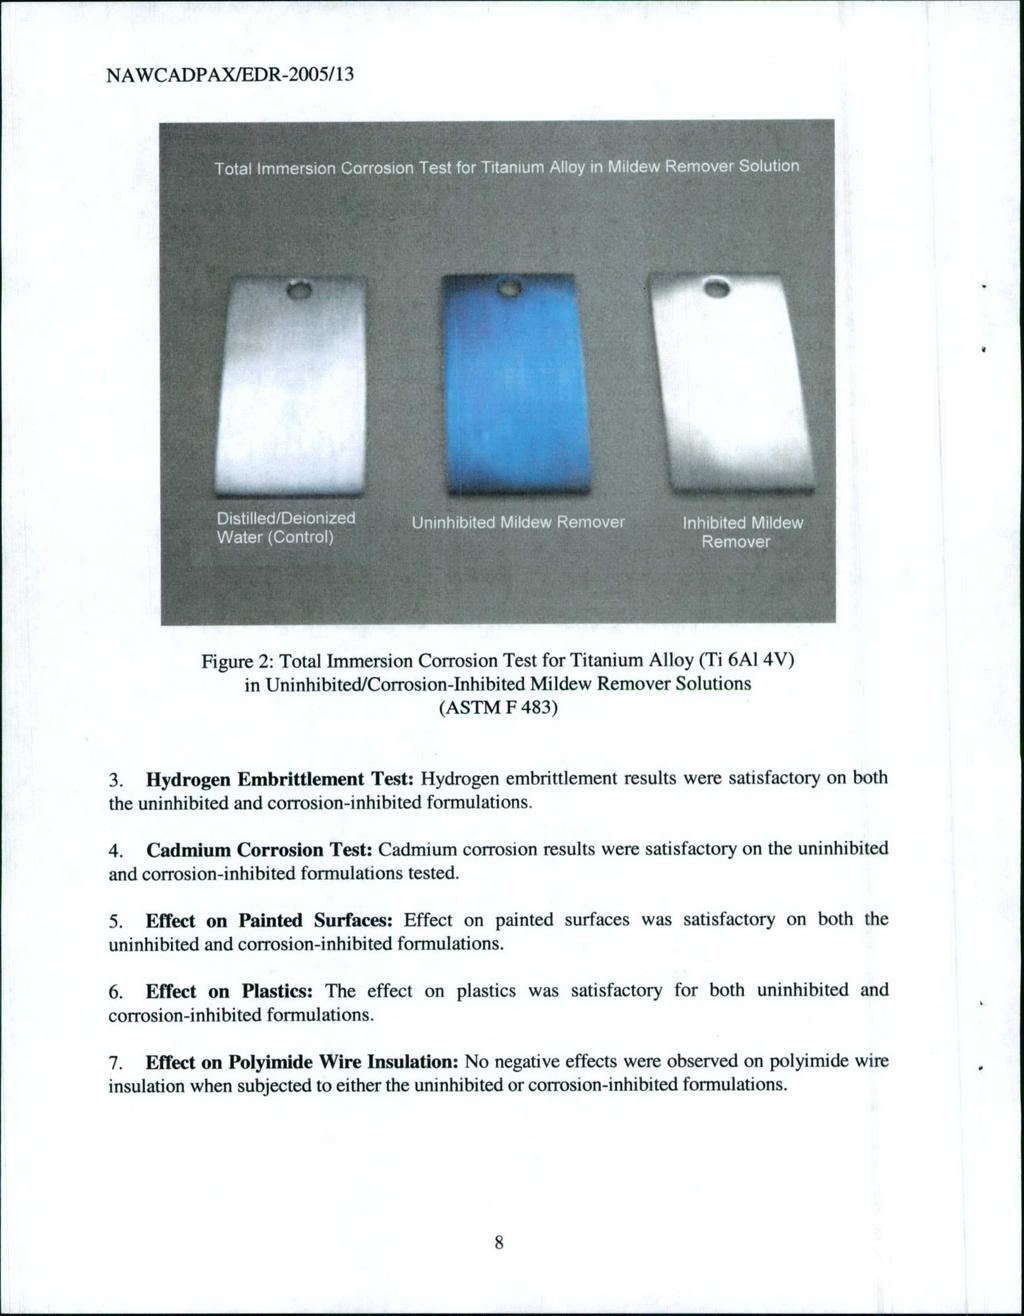 Figure 2: Total Immersion Corrosion Test for Titanium Alloy (Ti 6AI 4V) in Uninhibited/Corrosion-Inhibited Mildew Remover Solutions (ASTM F 483) 3.